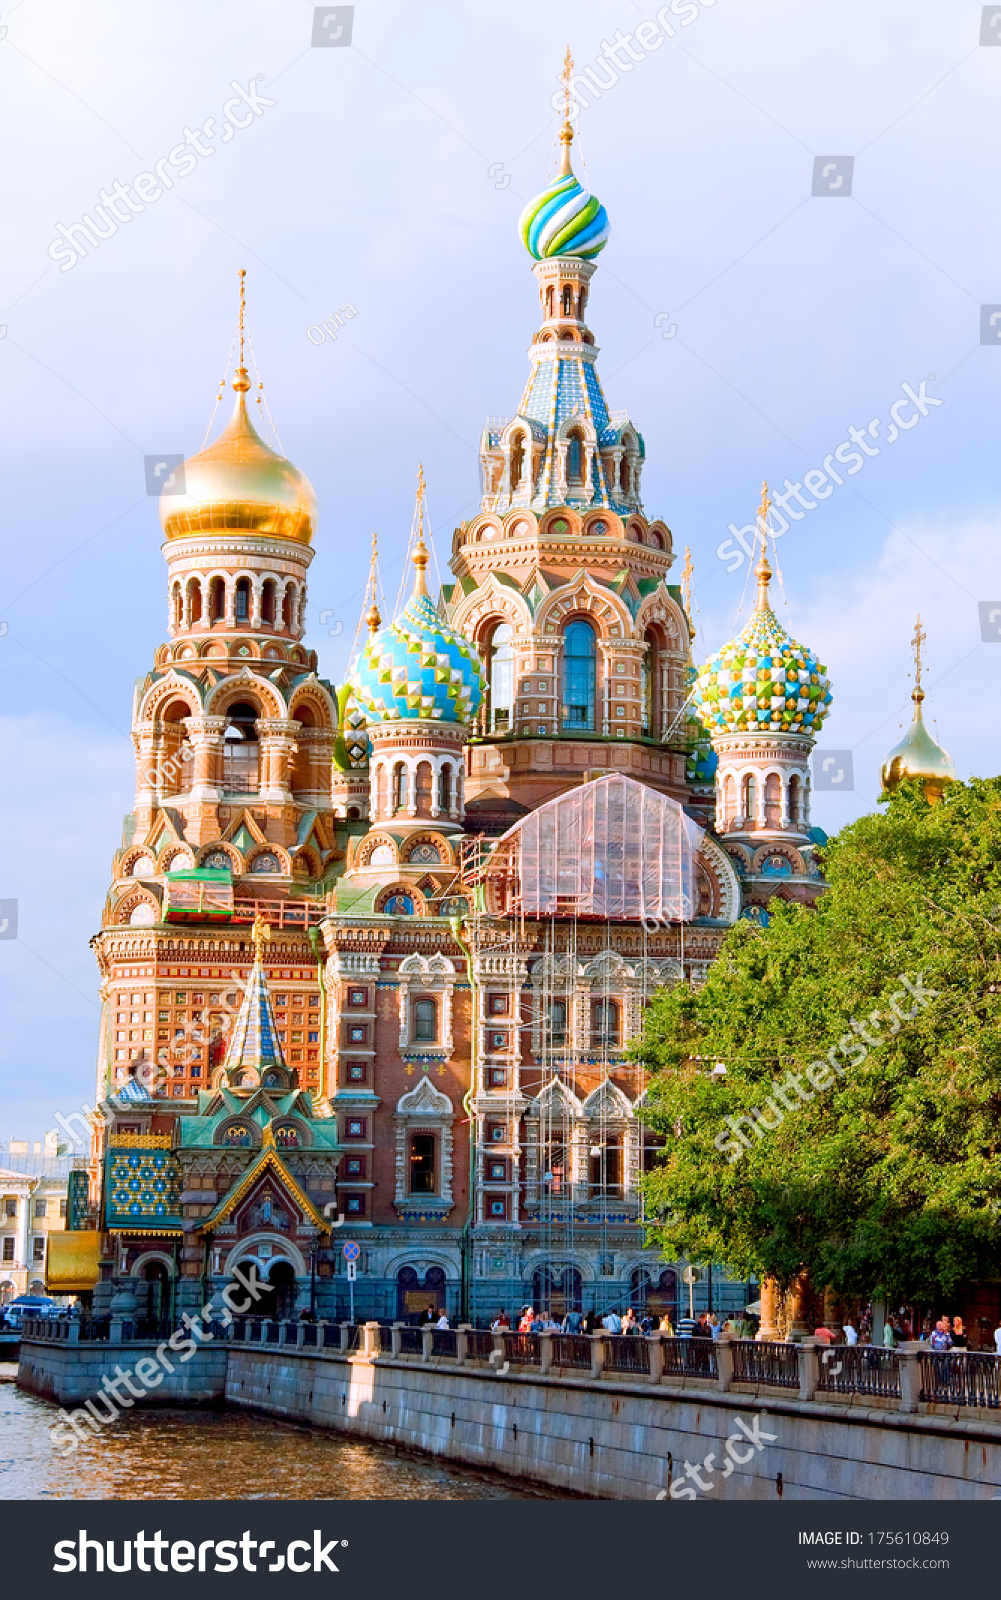 Church of Our Savior on Spilled Blood and Griboedova Canal. St. Petersburg, Russia. #175610849